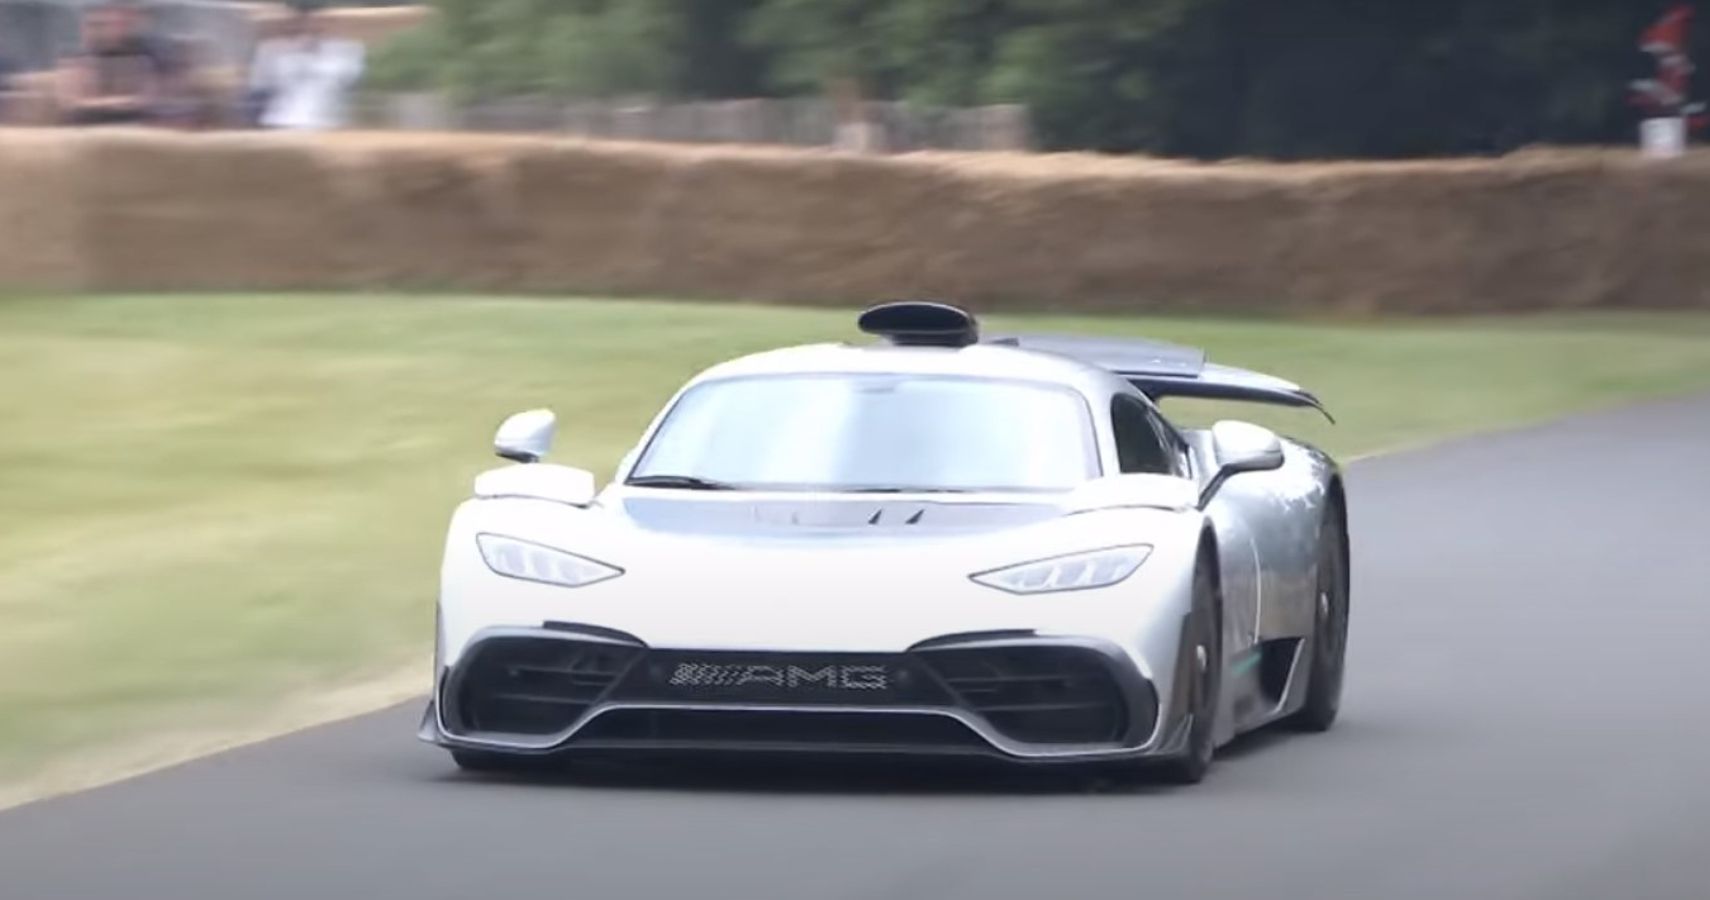 F1-Engined Mercedes-AMG One Hypercar Debuts At Goodwood Festival of Speed